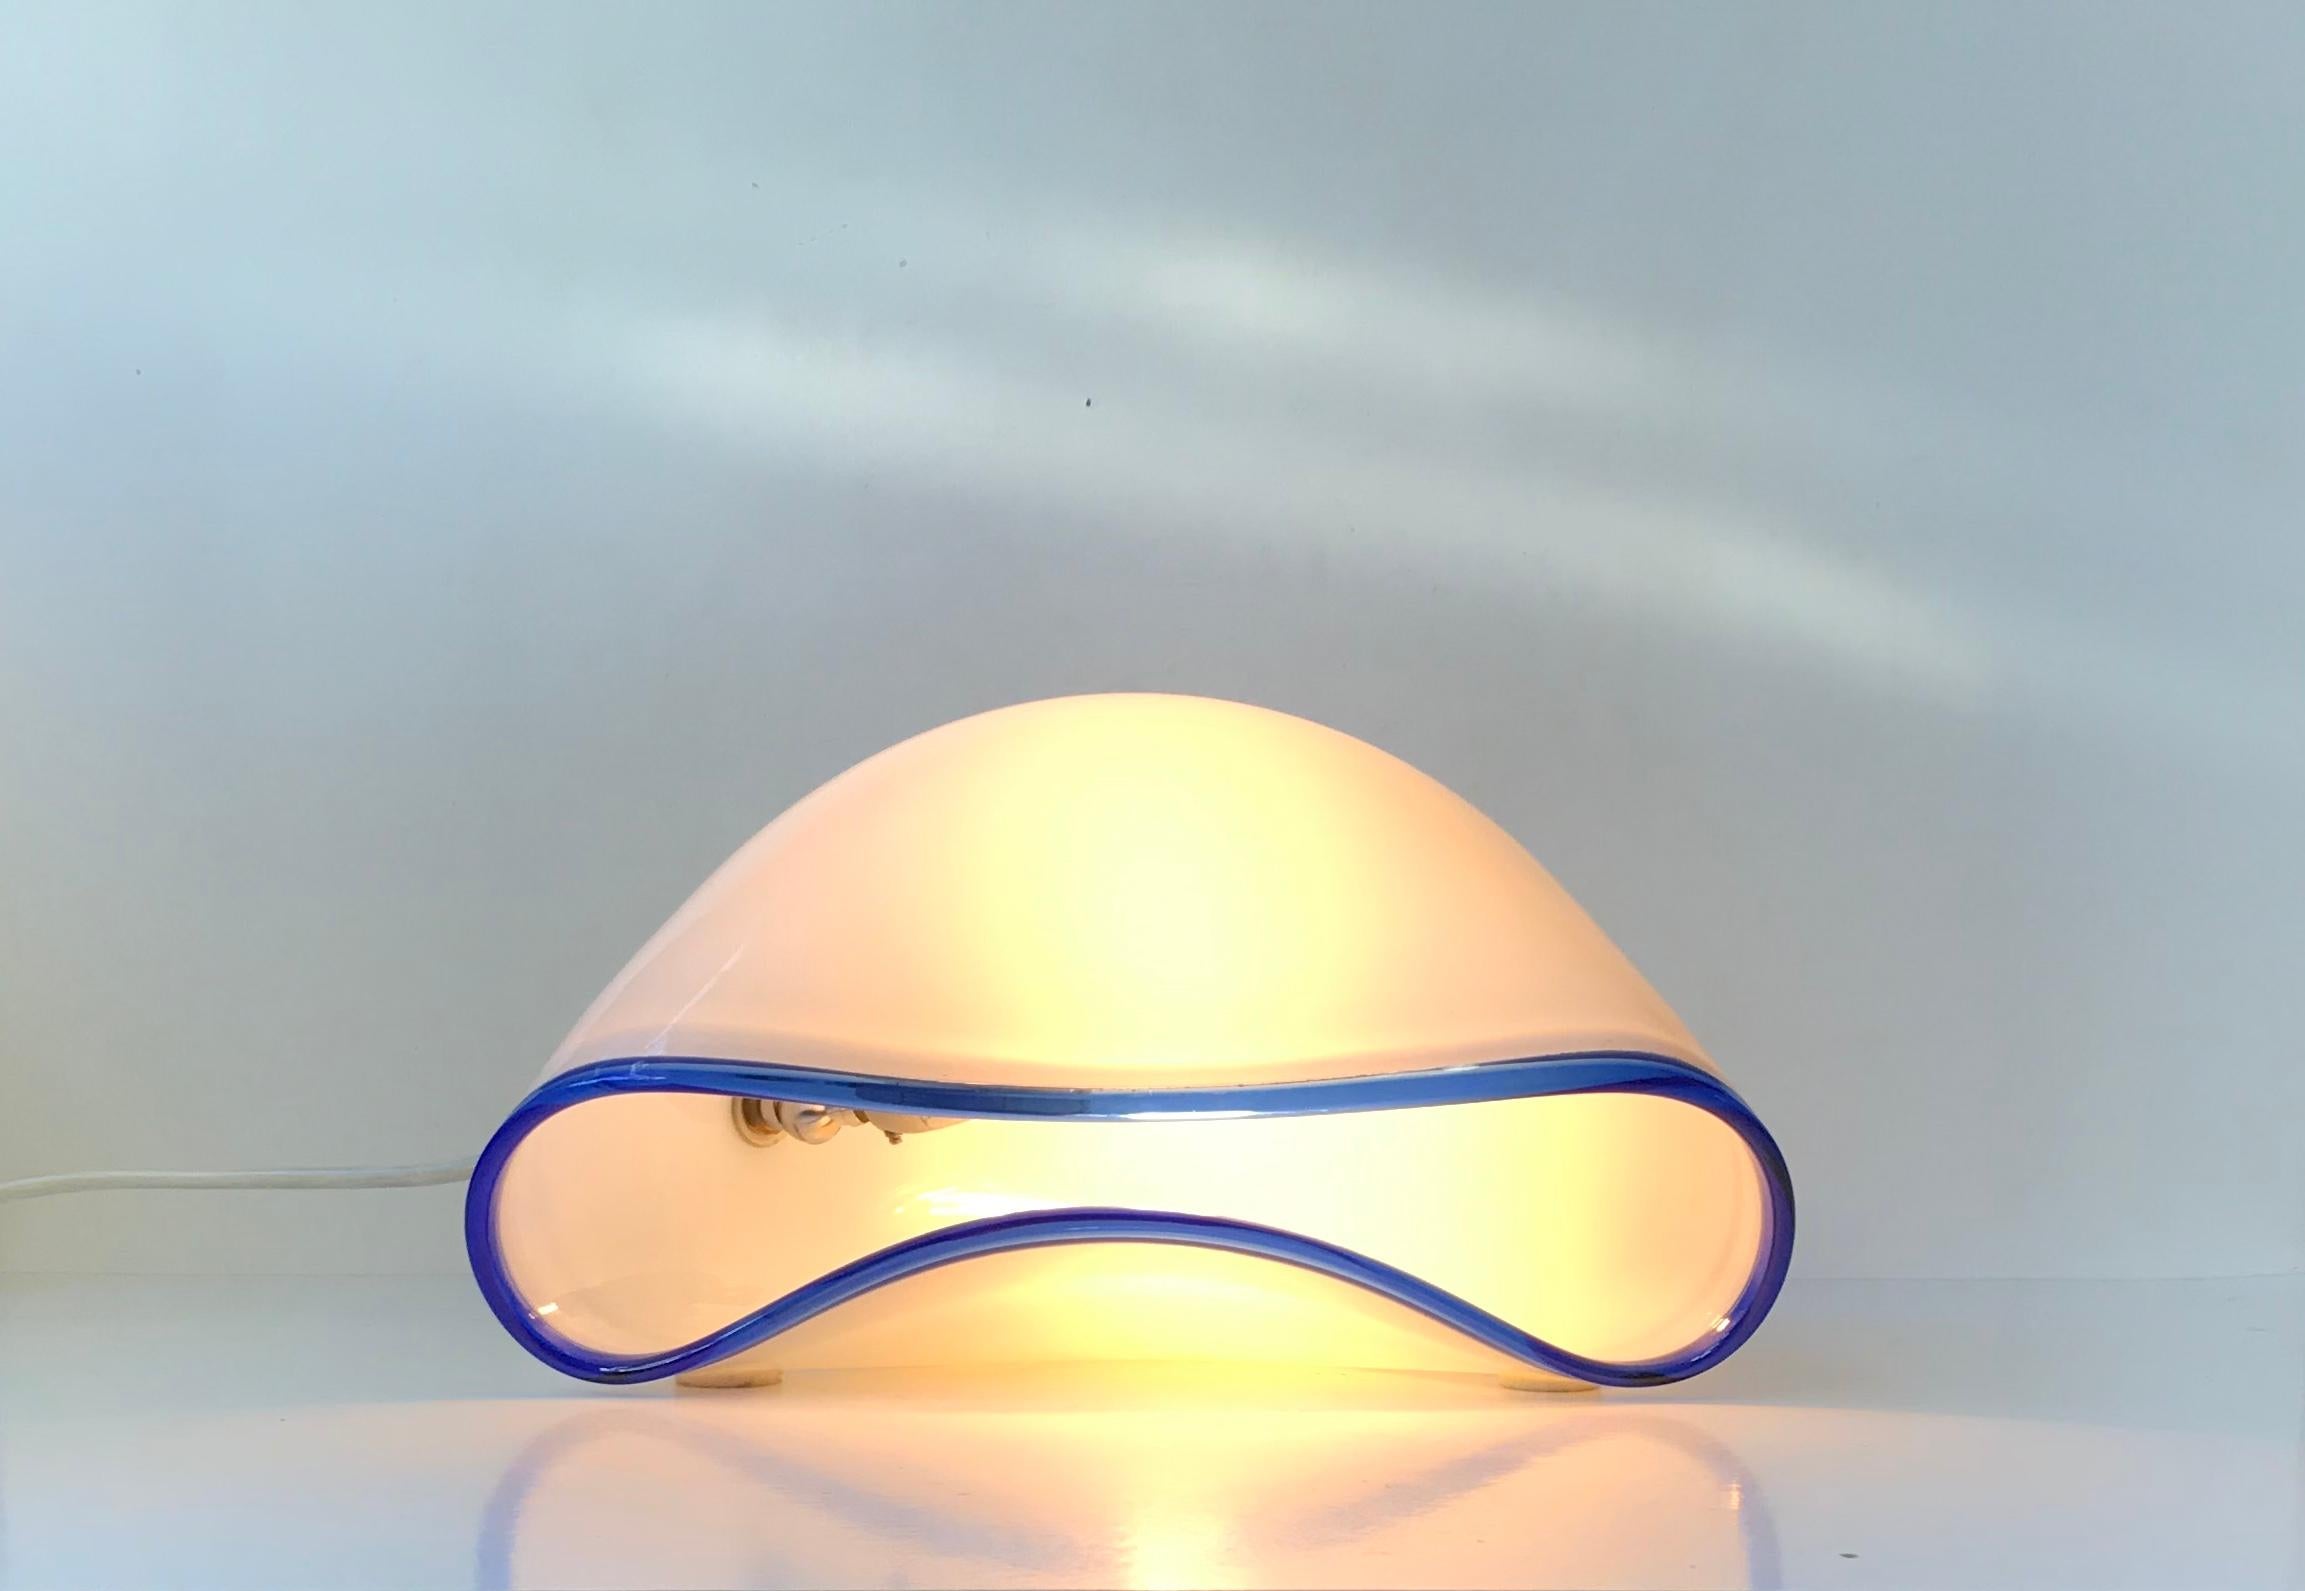 Biomorphic in shape this unusual table light called 